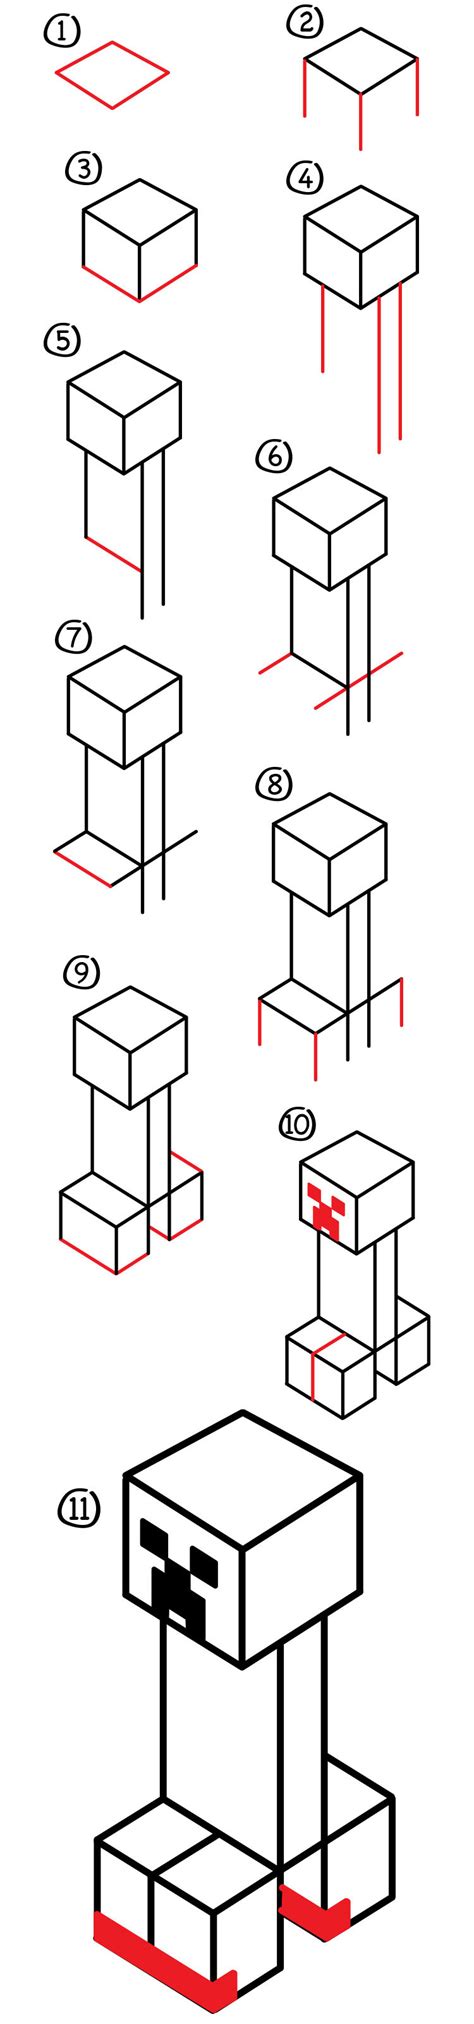 Https://wstravely.com/draw/how To Draw A Creeper